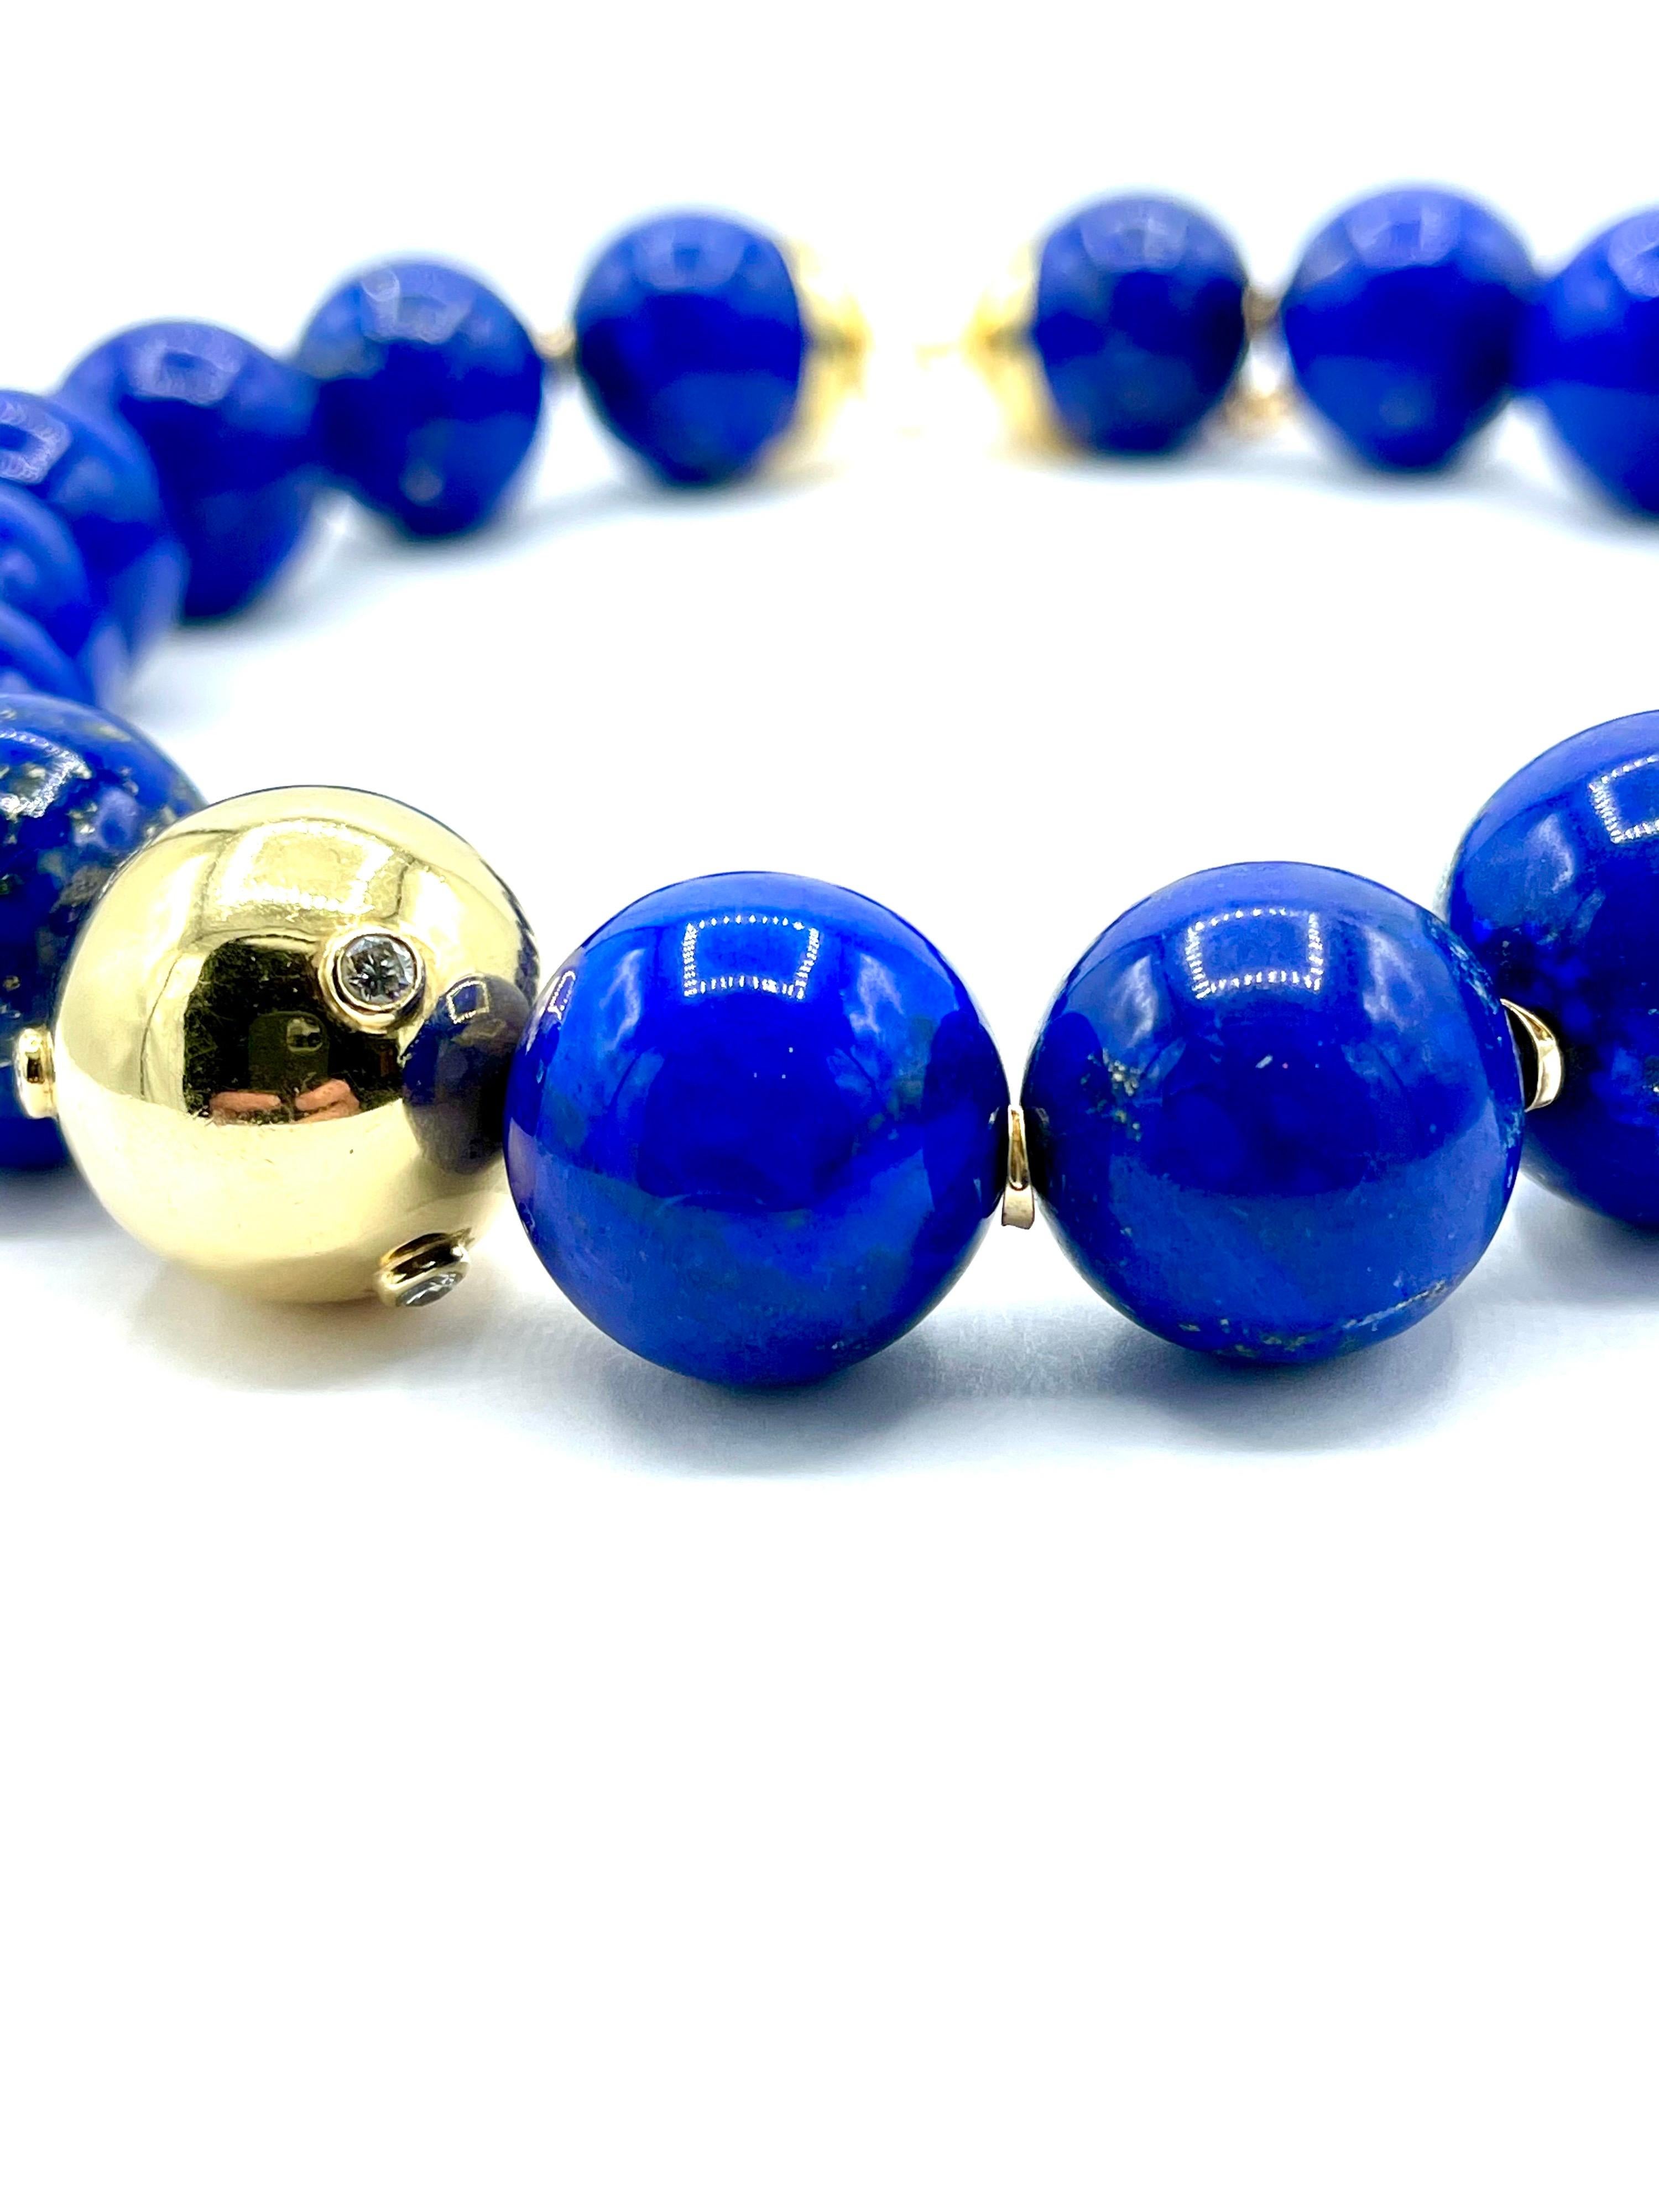 Always and iconic style bead necklace!  The beads range in size from 18.50 - 20.50mm and display a beautiful blue color with large flecks of pyrite.  There is an offset 18k yellow gold ball with bezel set round brilliant Diamonds weighing 0.60